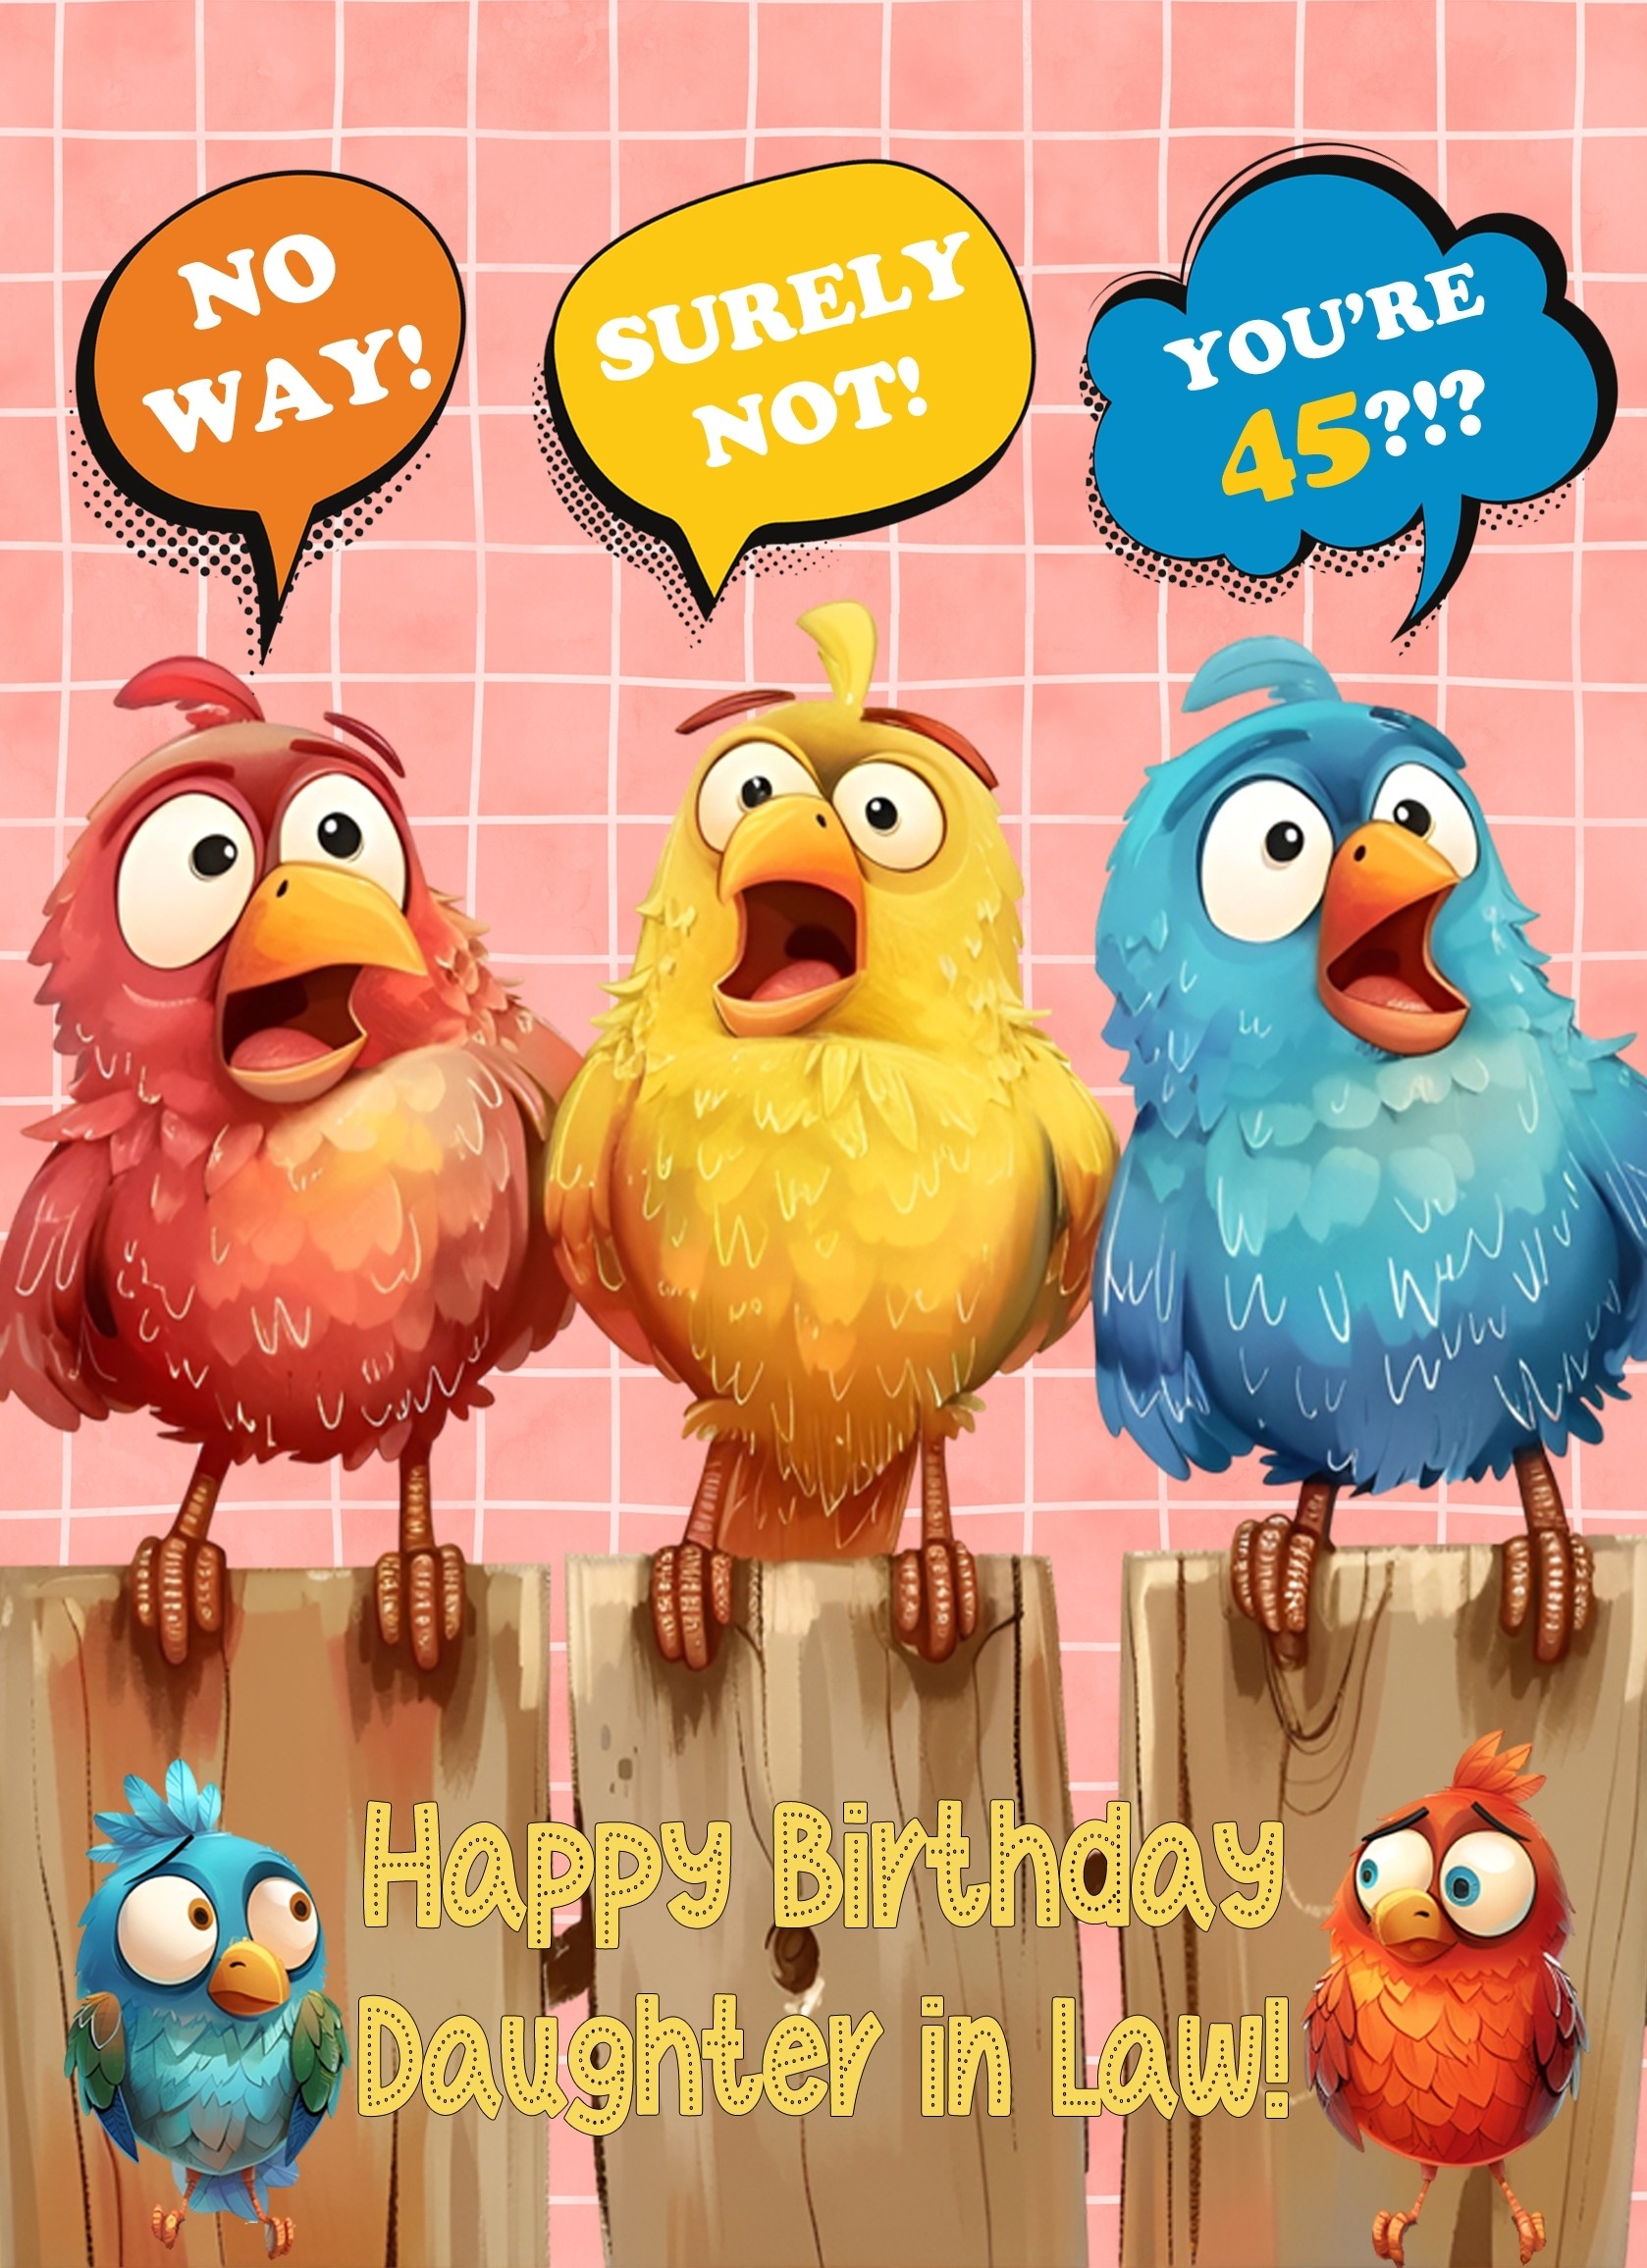 Daughter in Law 45th Birthday Card (Funny Birds Surprised)